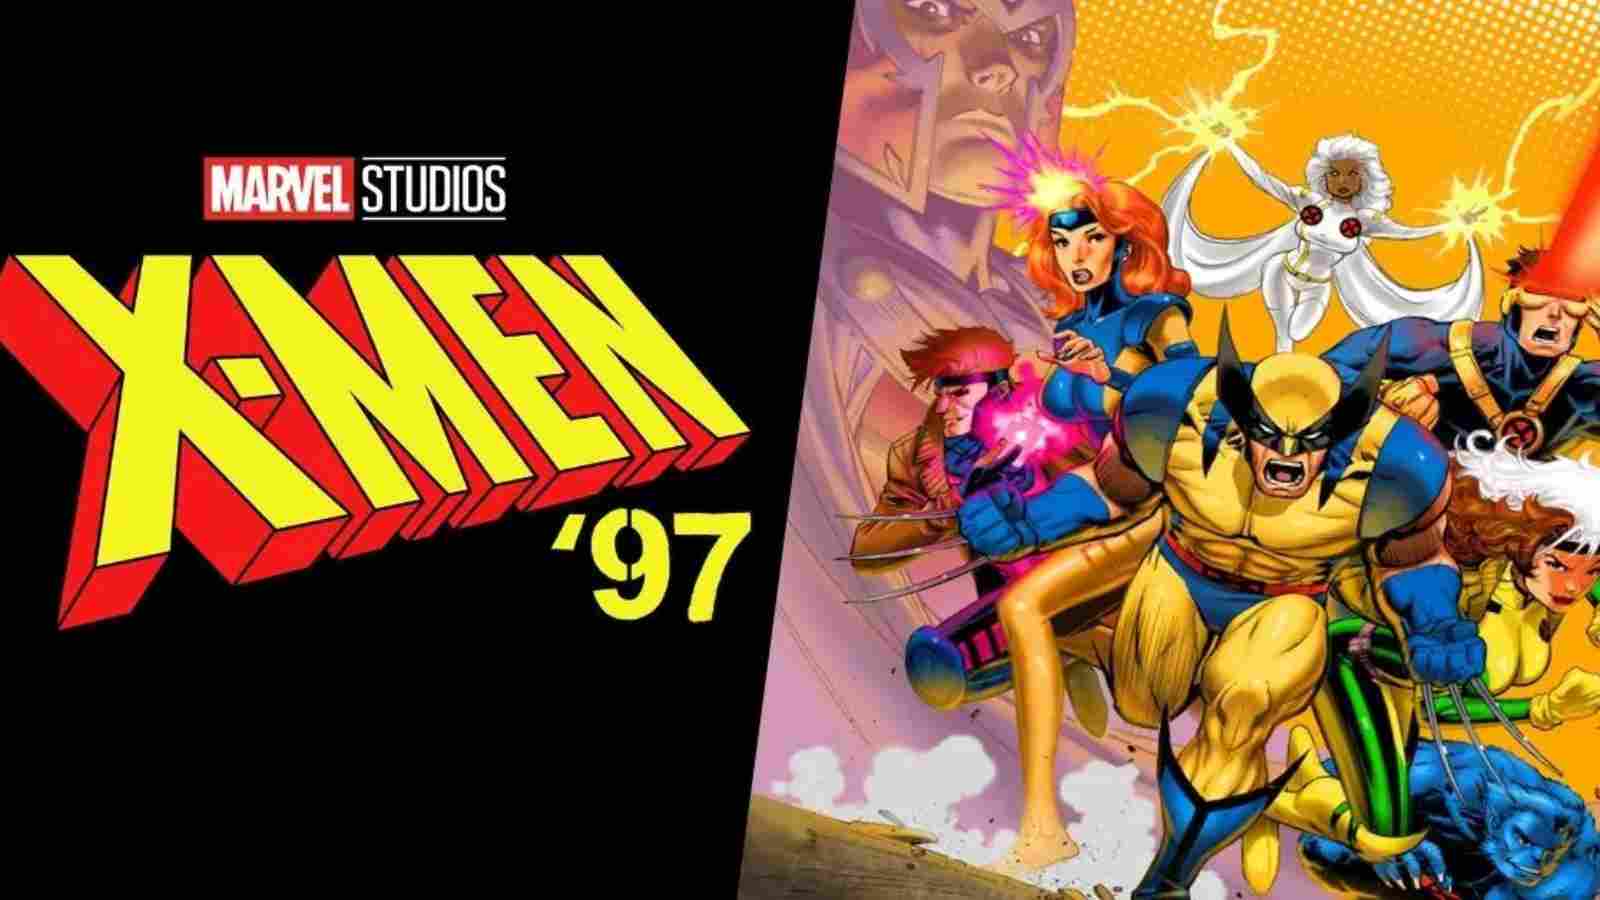 XMen 97 Animated Series Plot, Characters, Cast, Release Date And More